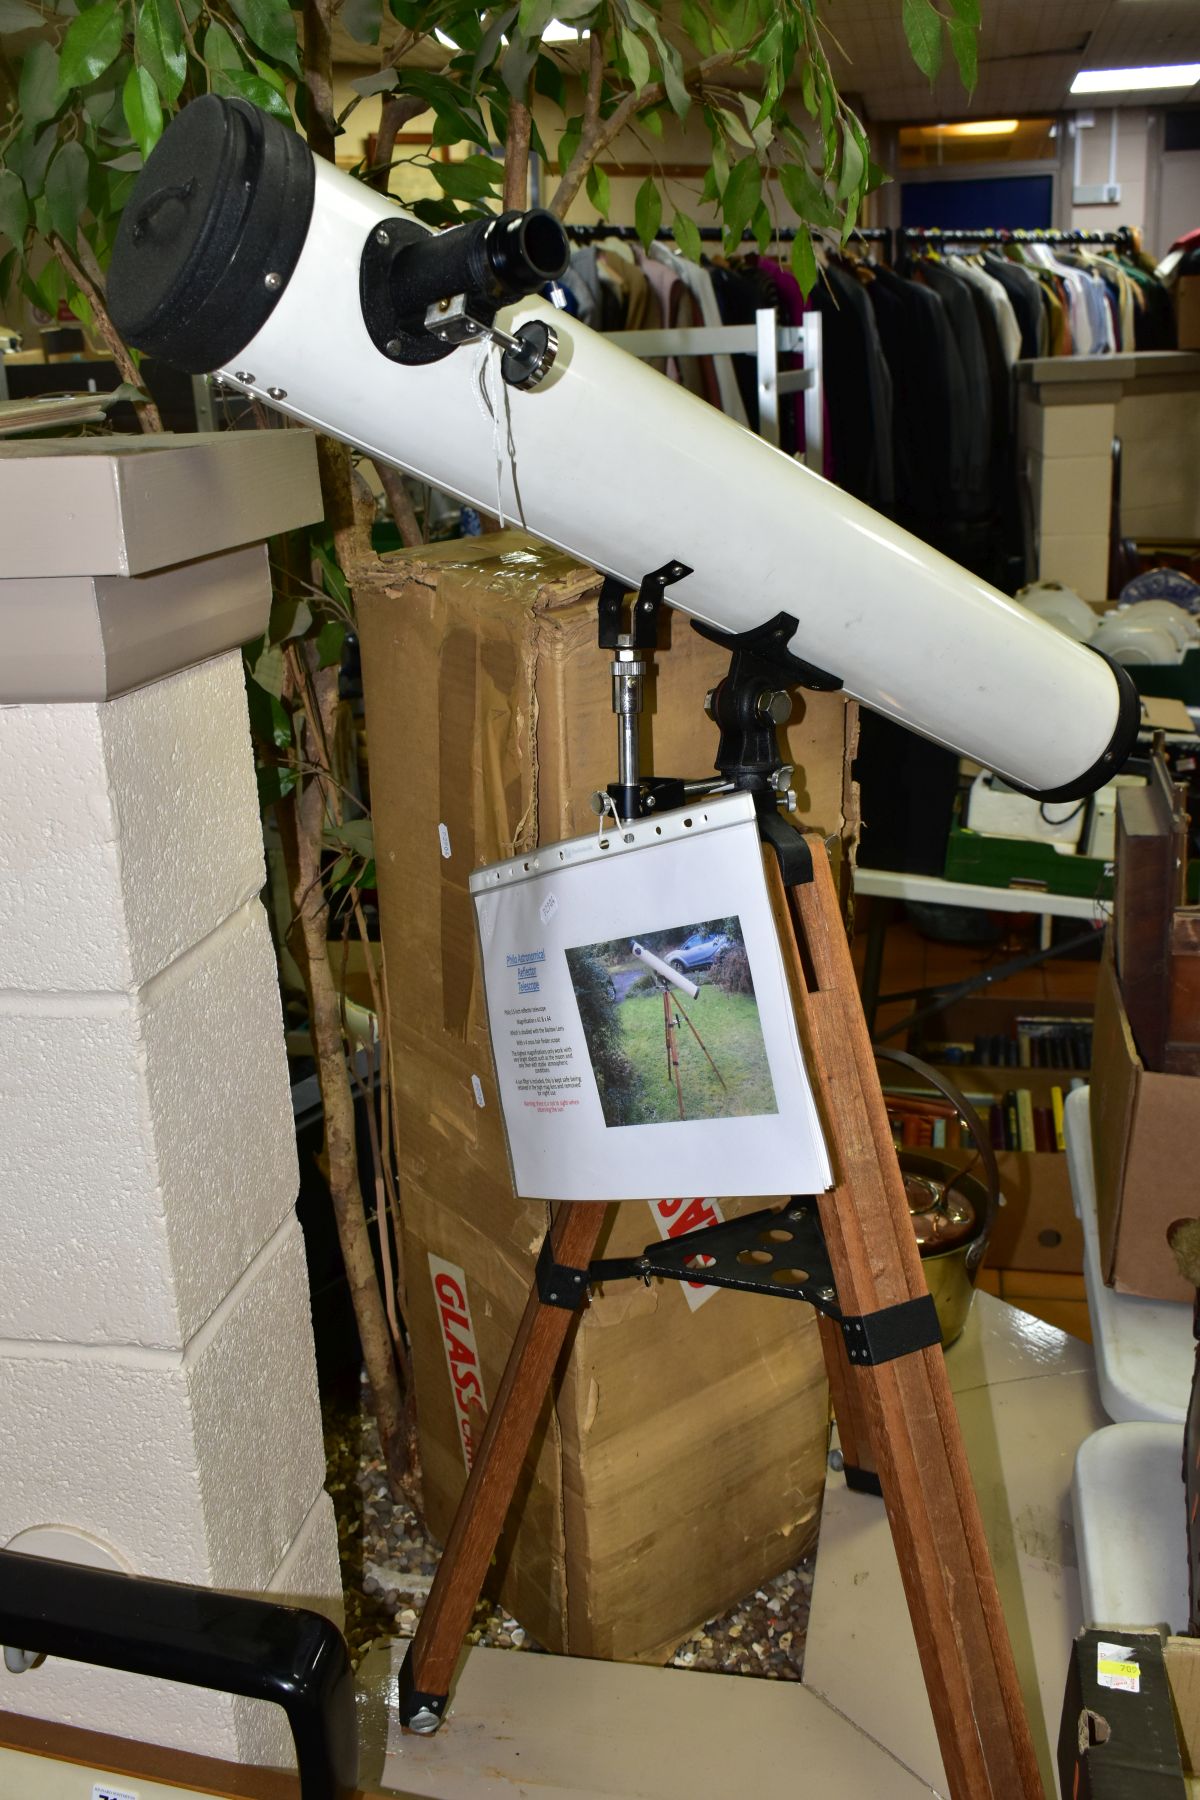 A BOXED PHILO ASTRONOMICAL REFLECTOR TELESCOPE, model no. H-35, serial no. 37324, D=90mm and F=